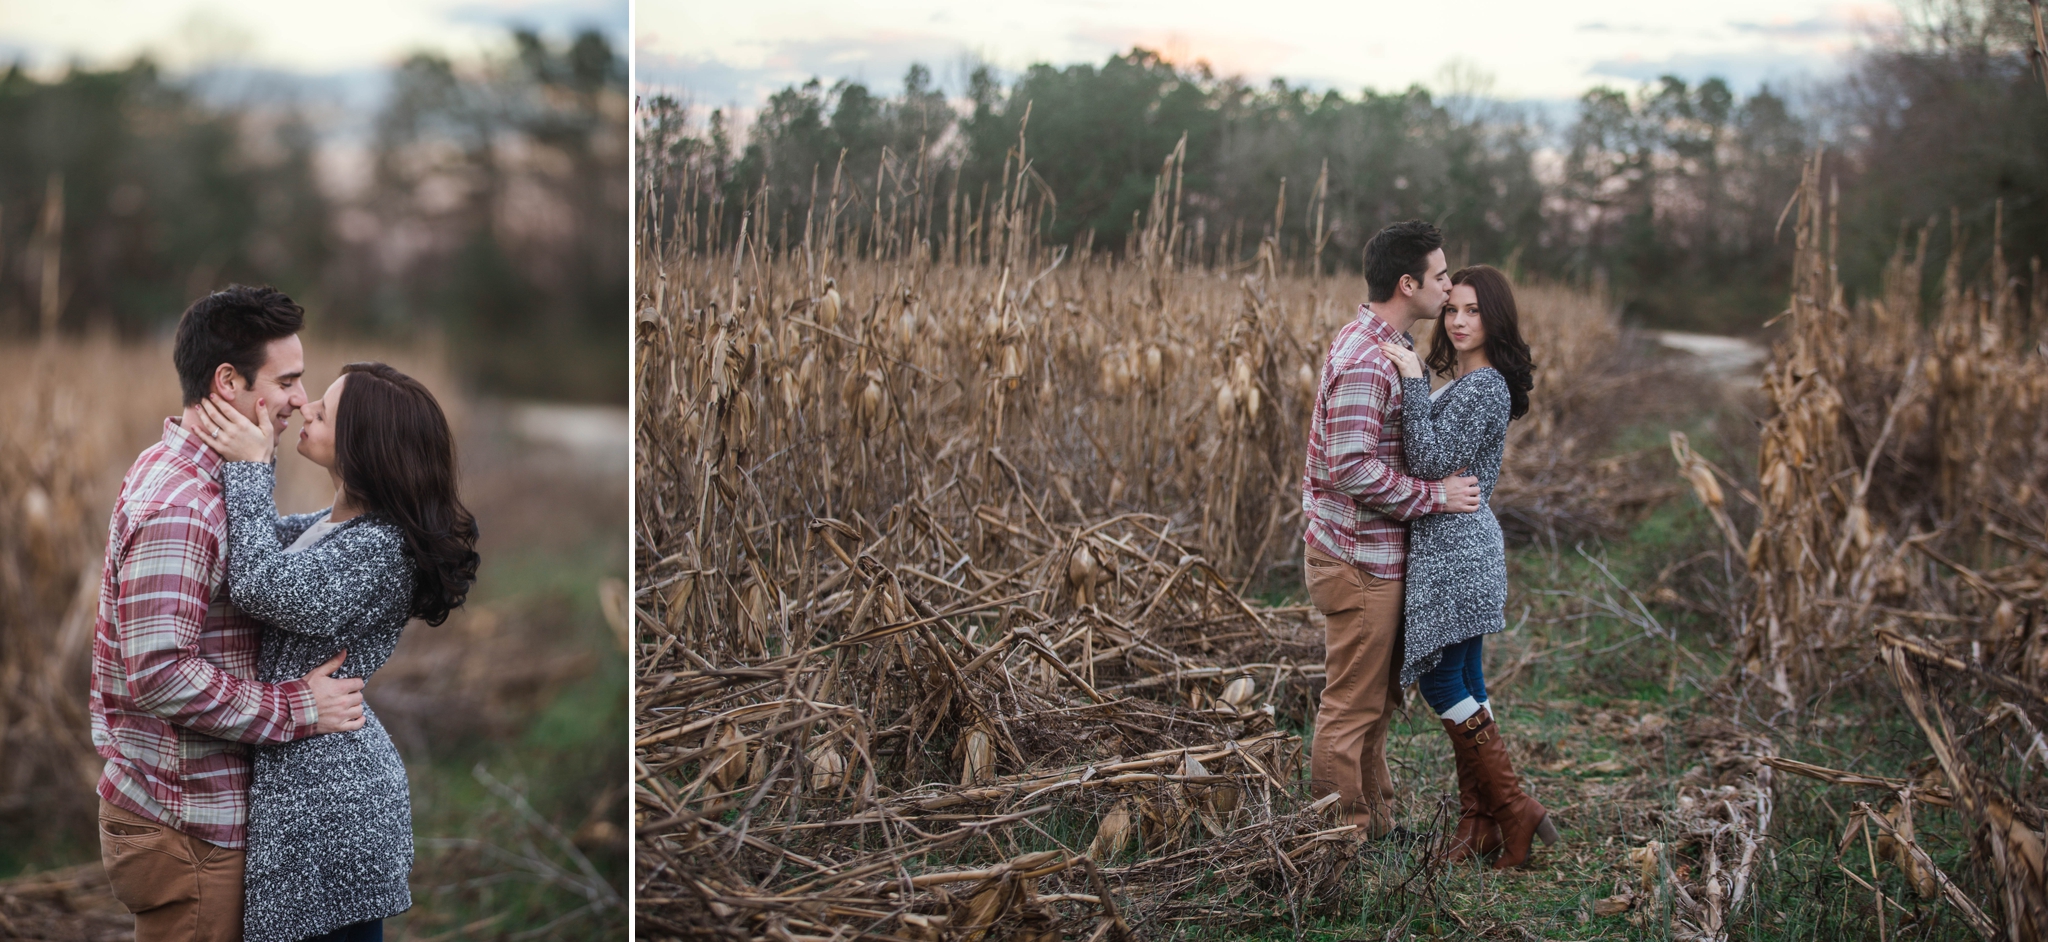 Fayetteville North Carolina Engagement Photographer - Rustic Cornfield Engagement Session - Mike and Jessica